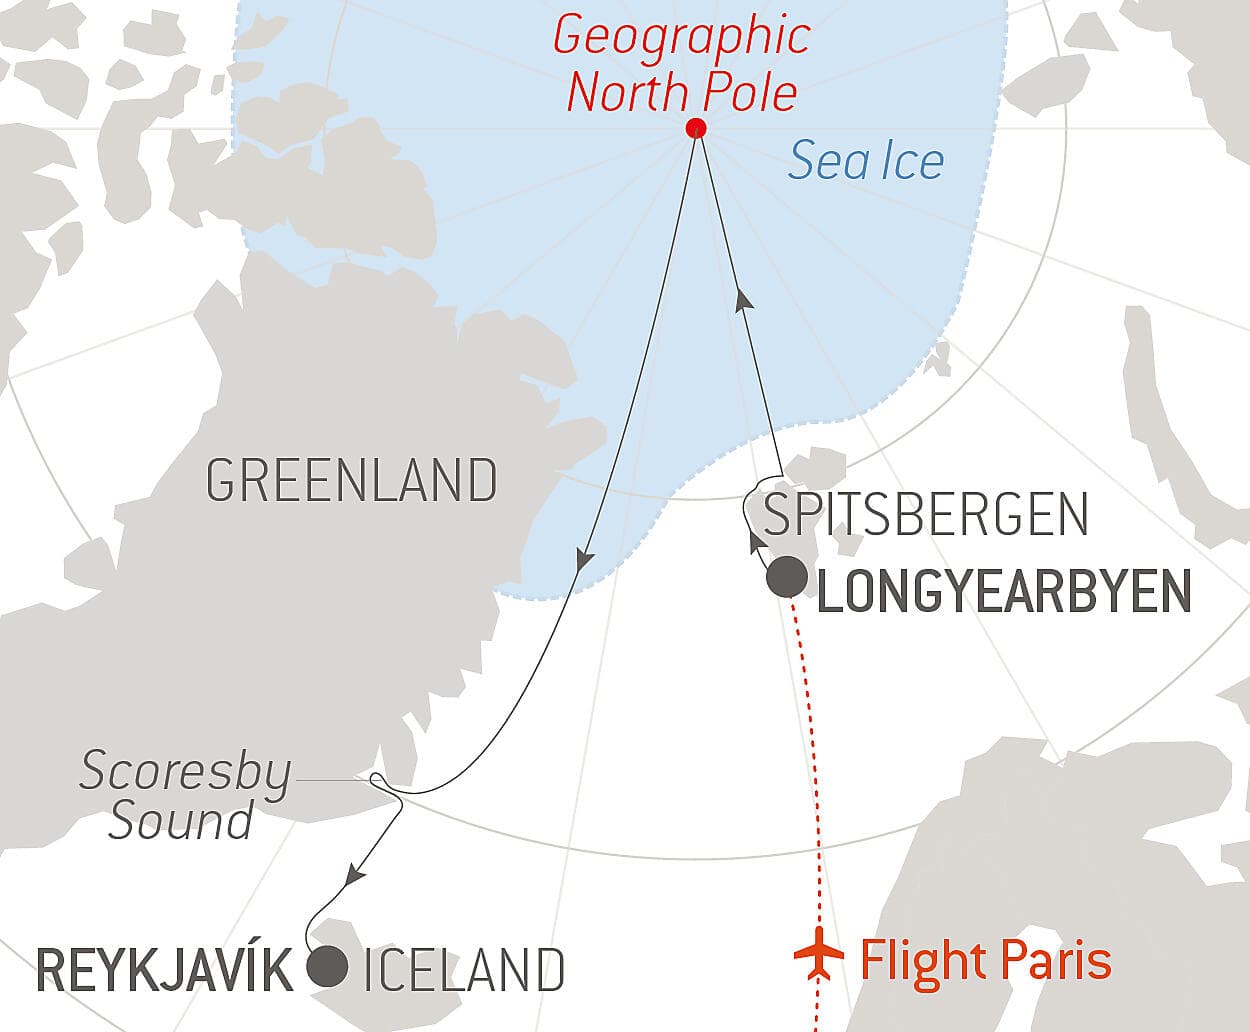 The Geographic North Pole &amp; Scoresby Sound